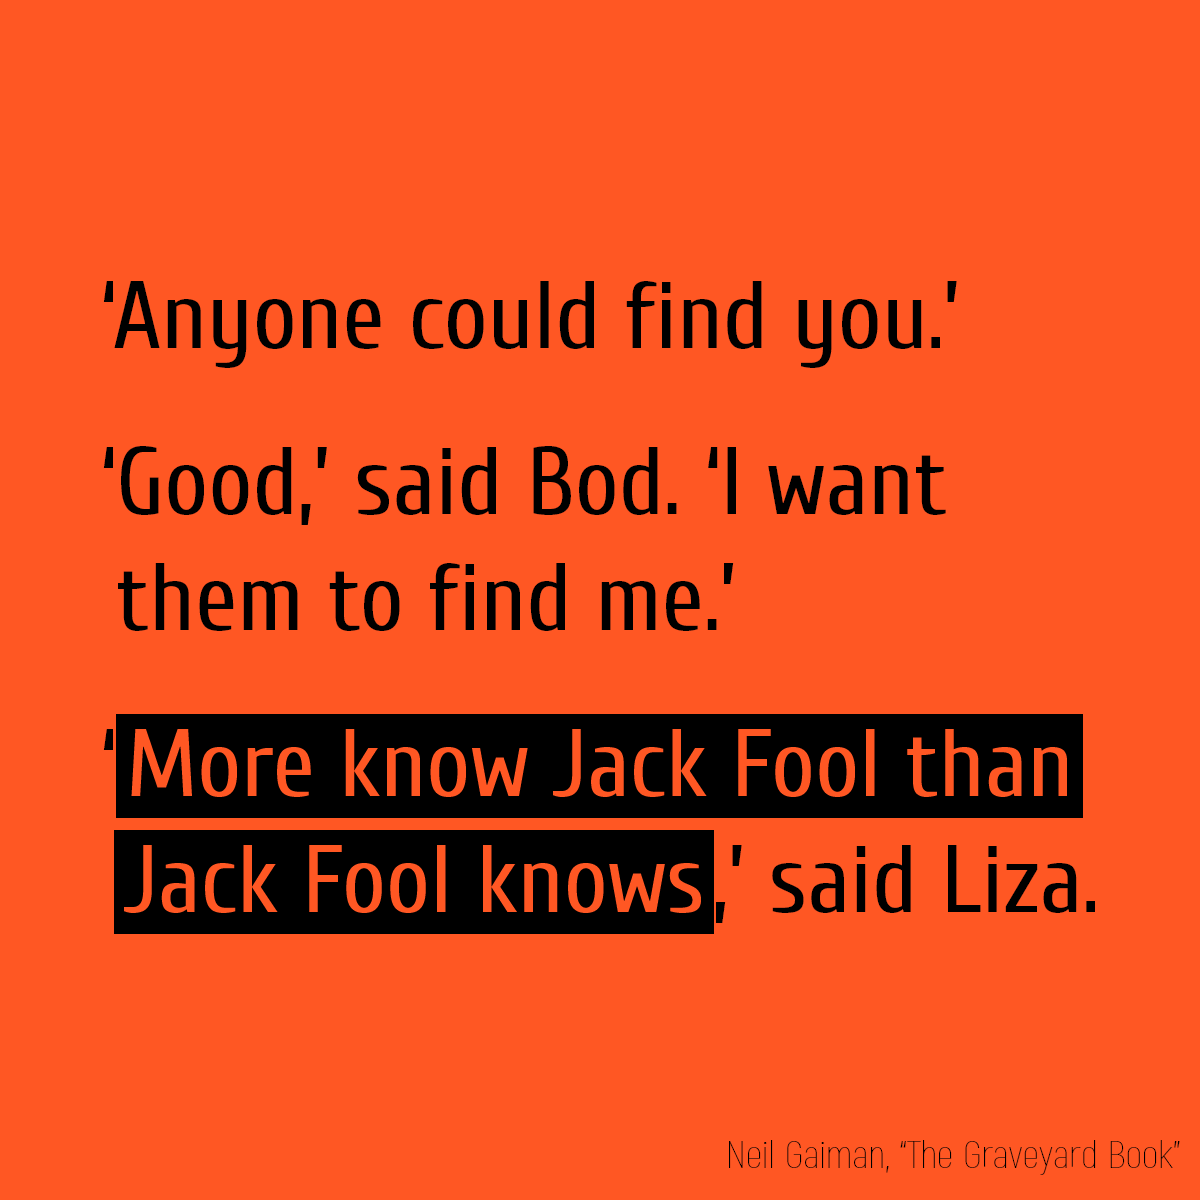 ‘Anyone could find you.’ ‘Good,’ said Bod. ‘I want them to find me.’ ‘**More know Jack Fool than Jack Fool knows**,’ said Liza.